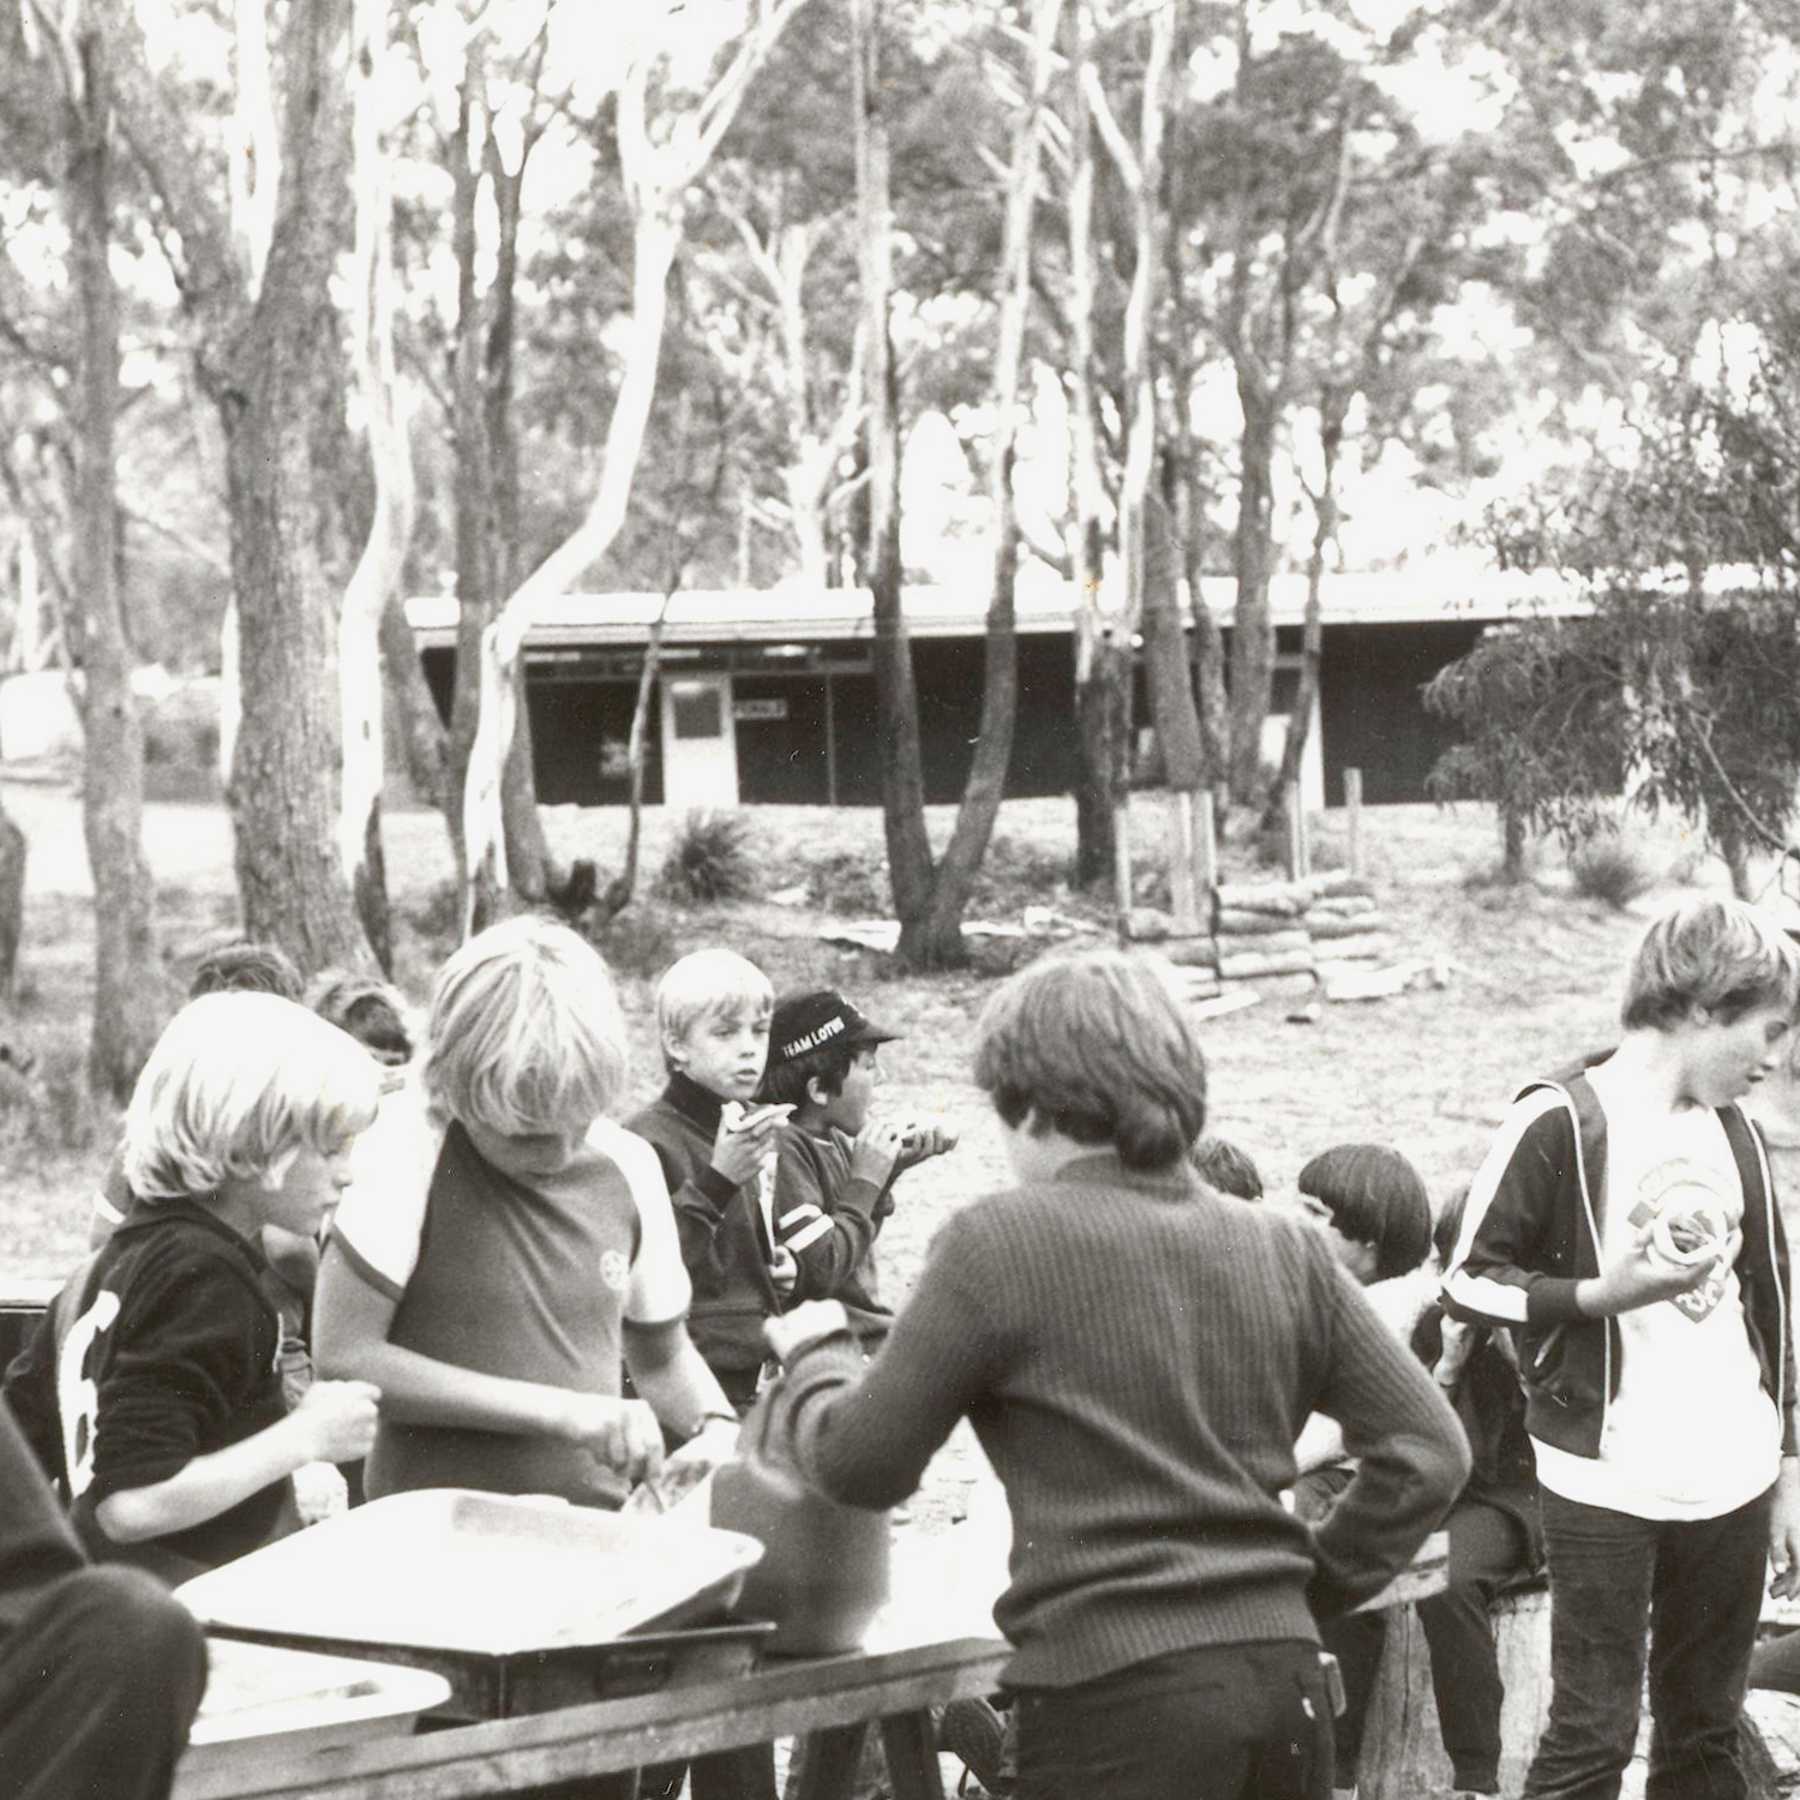 Juniors at Southport, 1981. Source: The Hutchins School Archives and Heritage Collection.